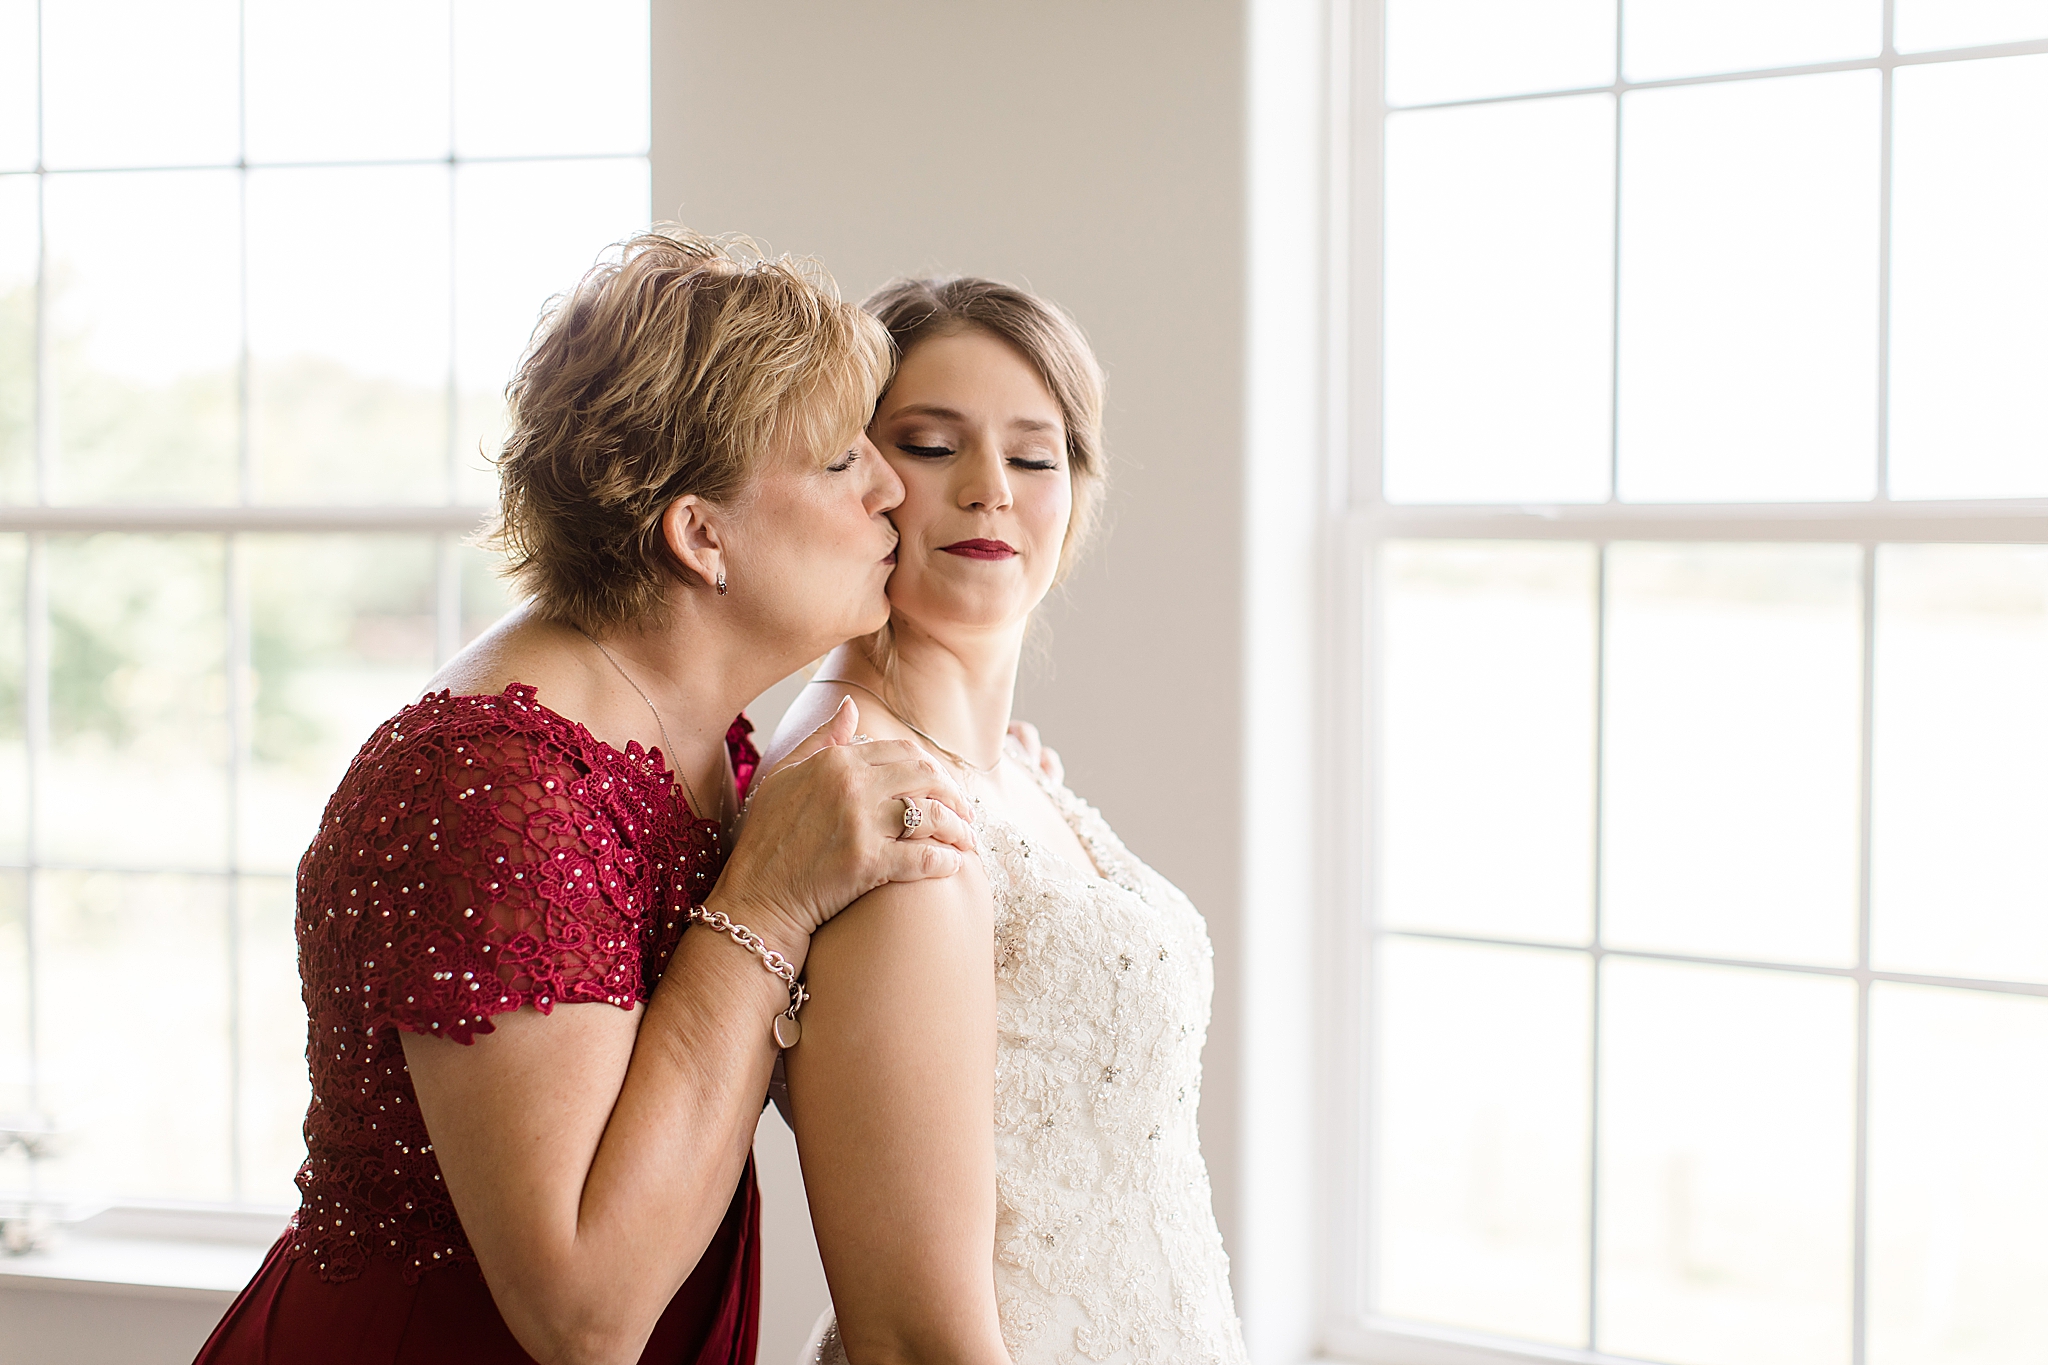 mom gives bride a kiss on the cheek during wedding prep